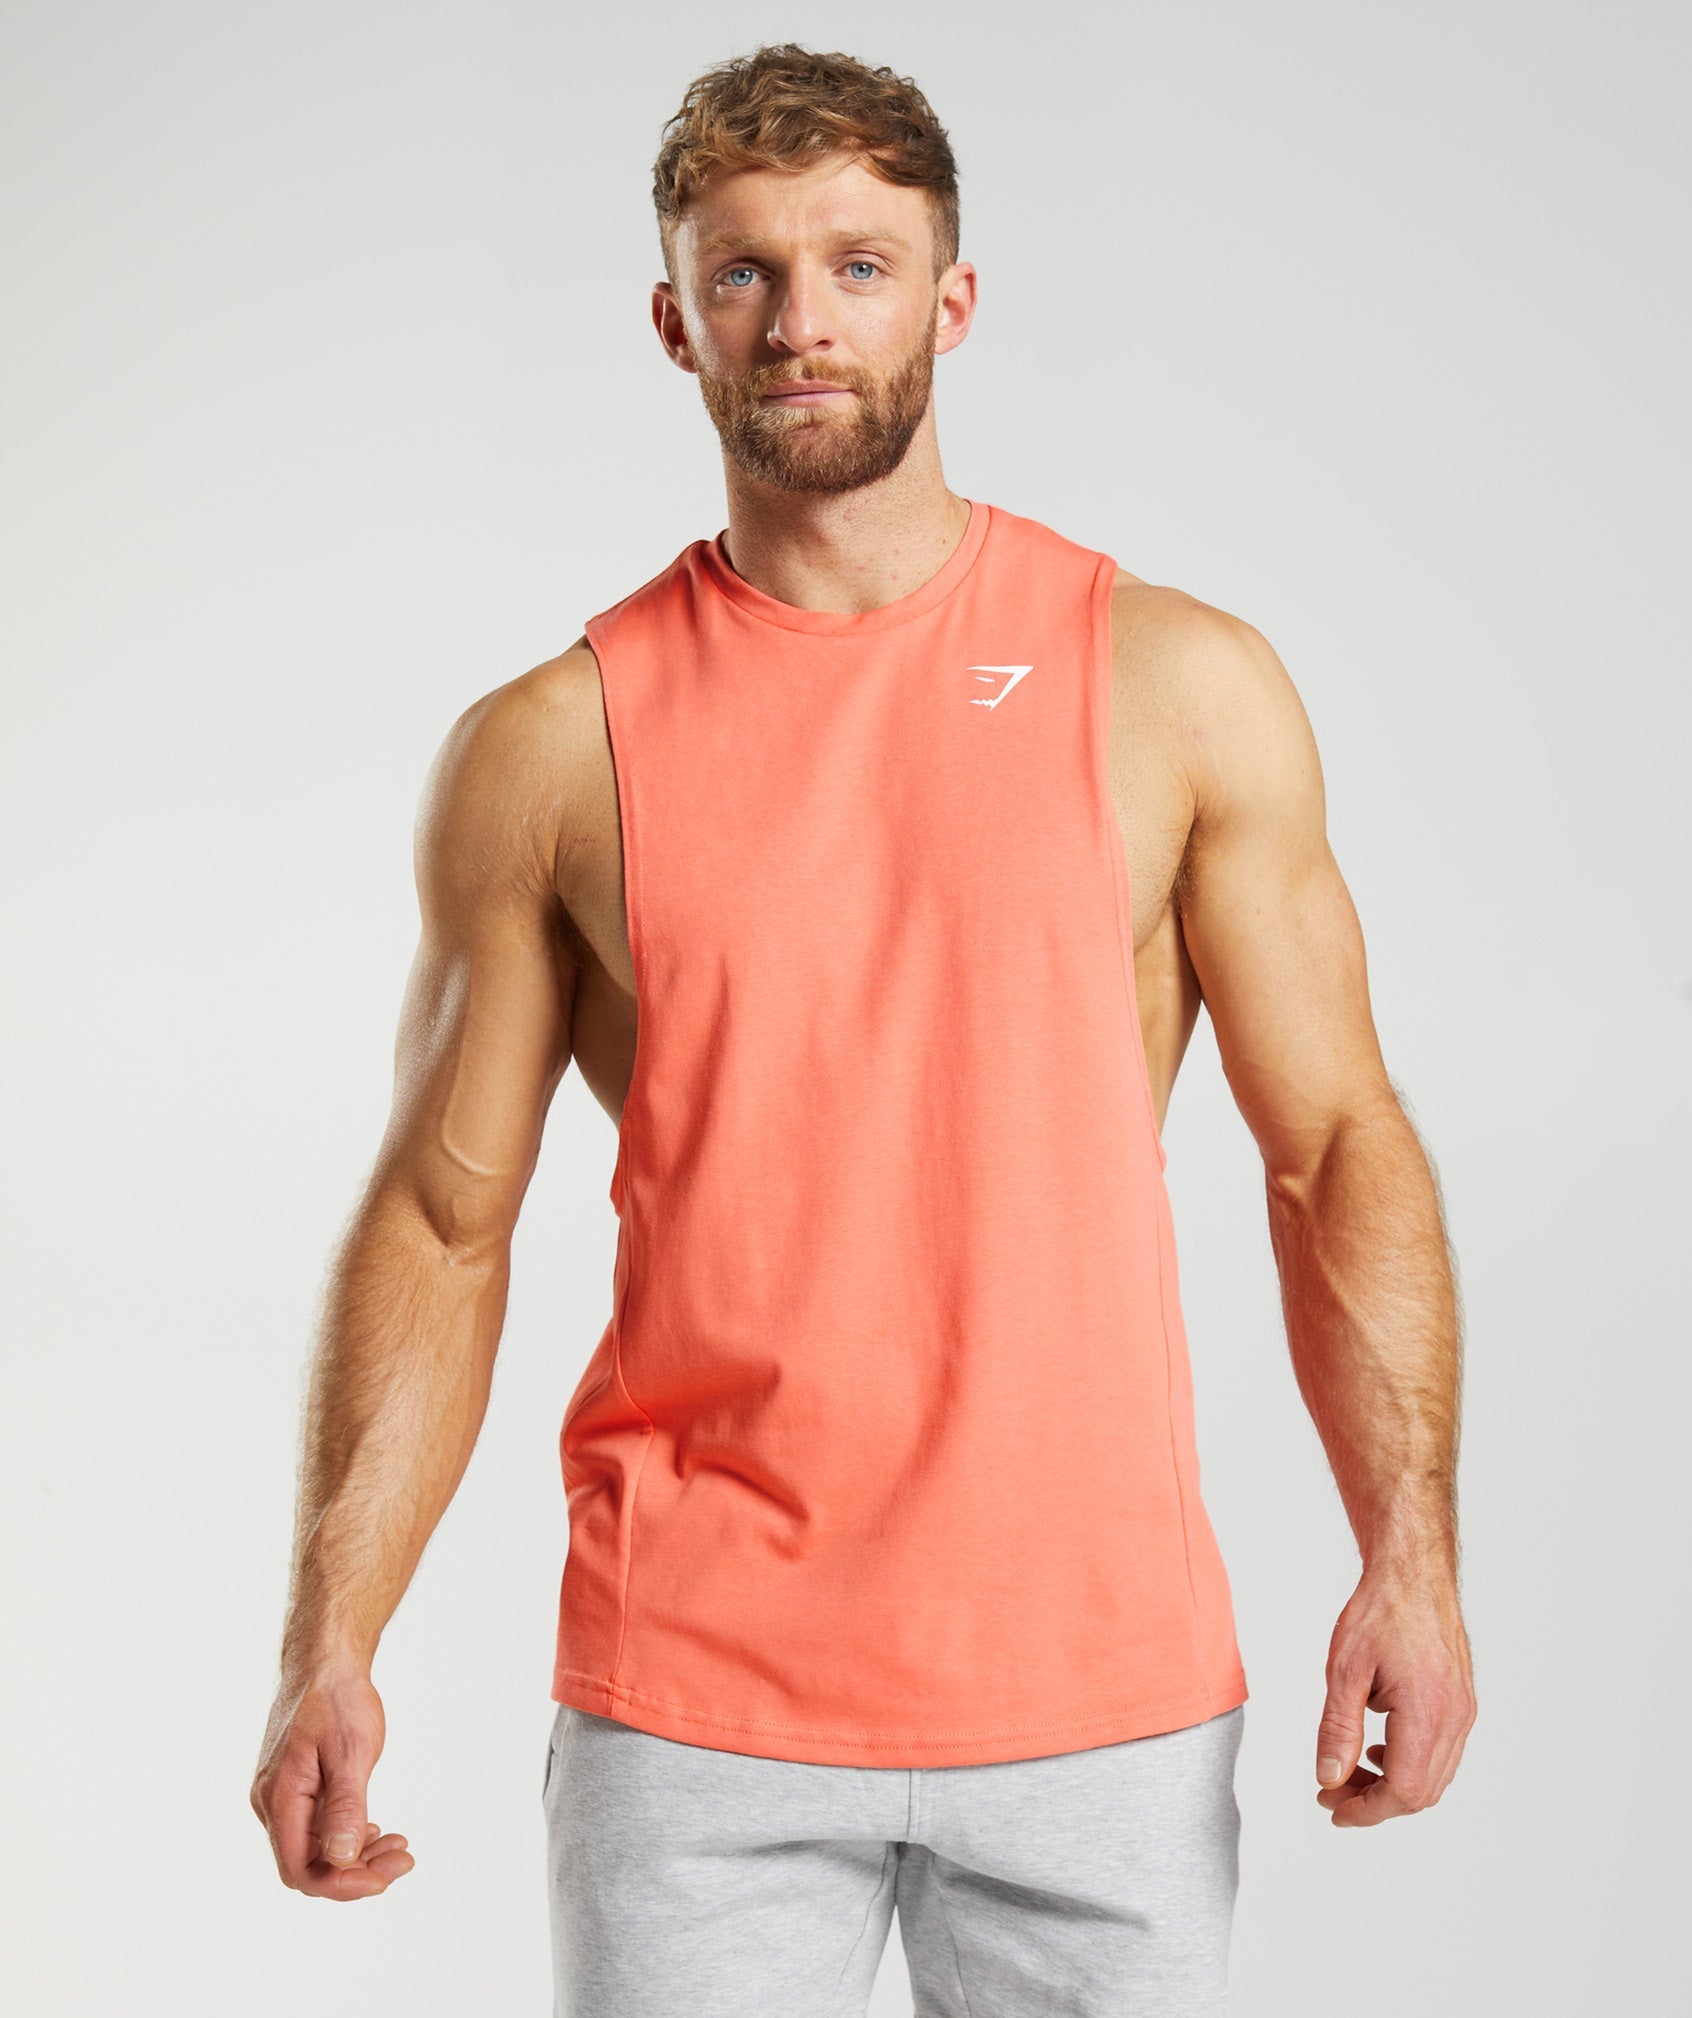 React Drop Arm Tank in Aerospace Orange is out of stock